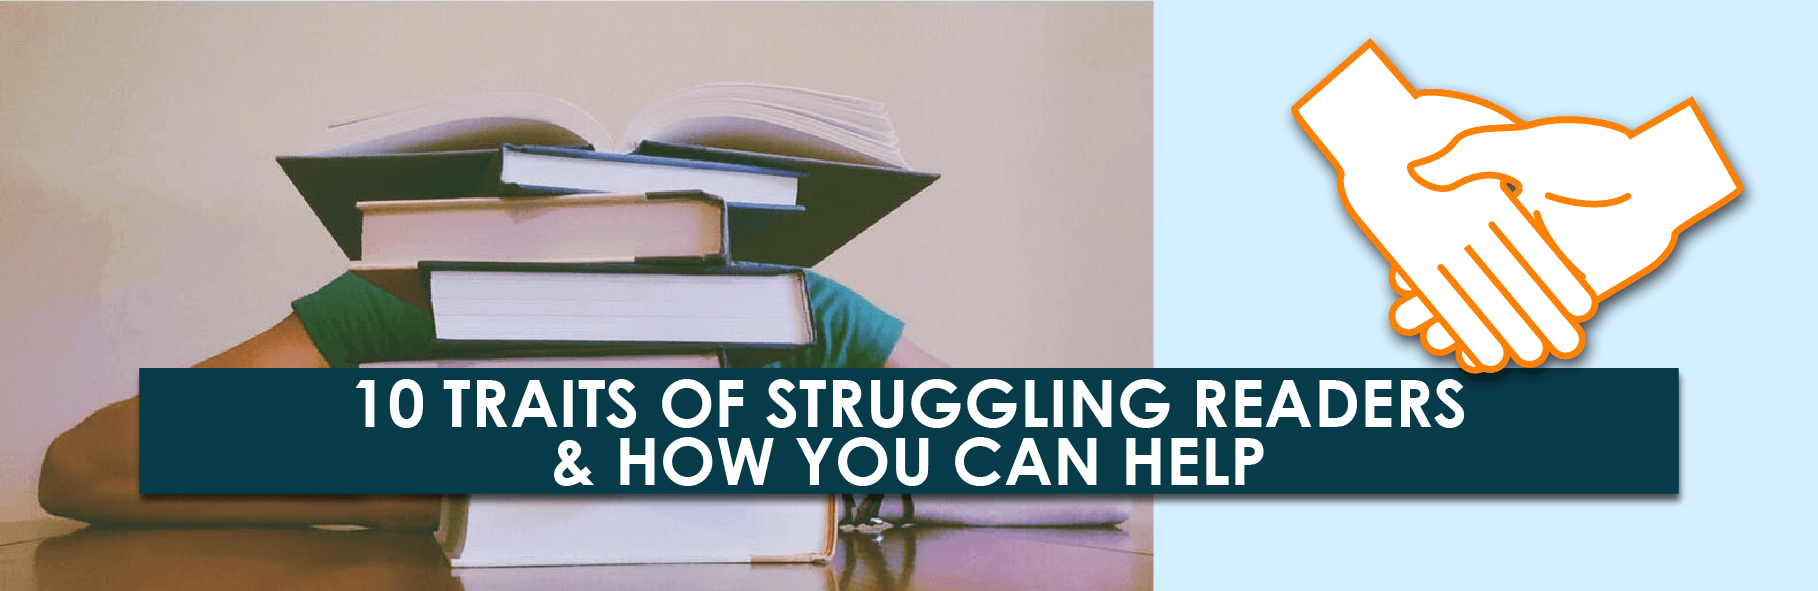 10 Traits of Struggling Readers & How You Can Help